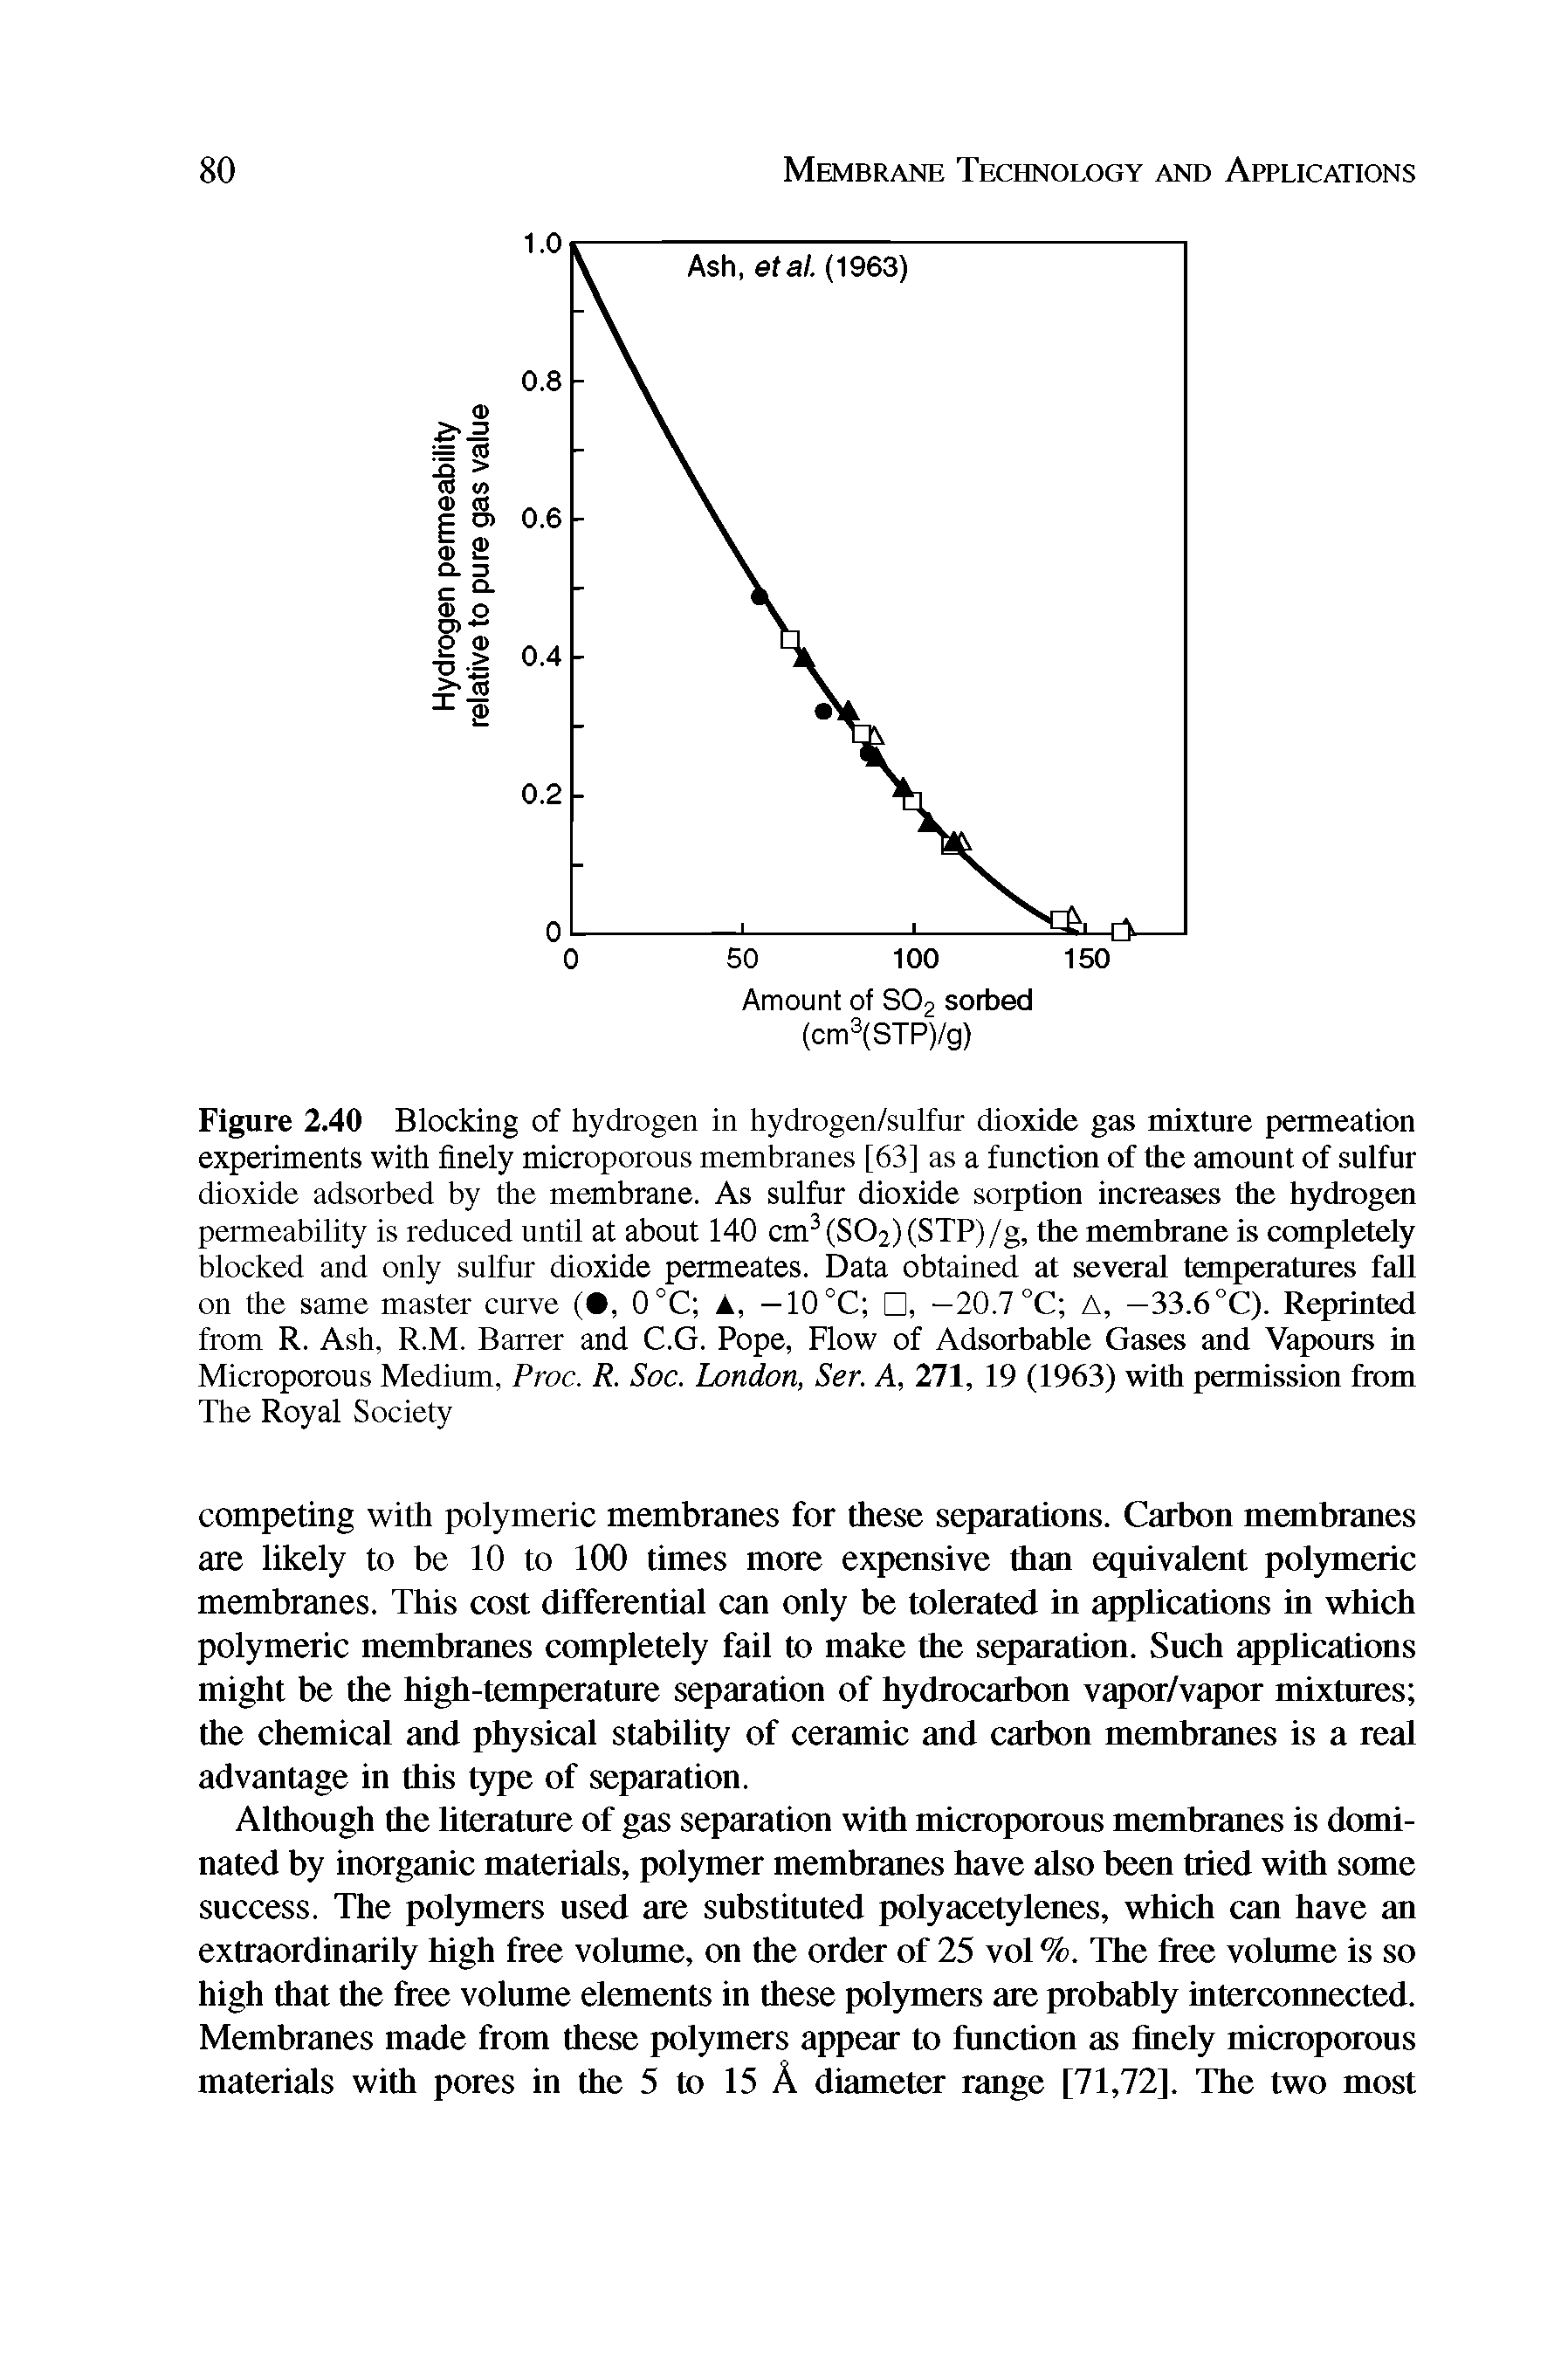 Figure 2.40 Blocking of hydrogen in hydrogen/sulfur dioxide gas mixture permeation experiments with finely microporous membranes [63] as a function of the amount of sulfur dioxide adsorbed by the membrane. As sulfur dioxide sorption increases the hydrogen permeability is reduced until at about 140 cm3 (SO2) (STP) /g, the membrane is completely blocked and only sulfur dioxide permeates. Data obtained at several temperatures fall on the same master curve ( , 0°C A. —10 °C , — 20.7 °C A, —33.6°C). Reprinted from R. Ash, R.M. Barrer and C.G. Pope, Flow of Adsorbable Gases and Vapours in Microporous Medium, Proc. R. Soc. London, Ser. A, 271, 19 (1963) with permission from The Royal Society...